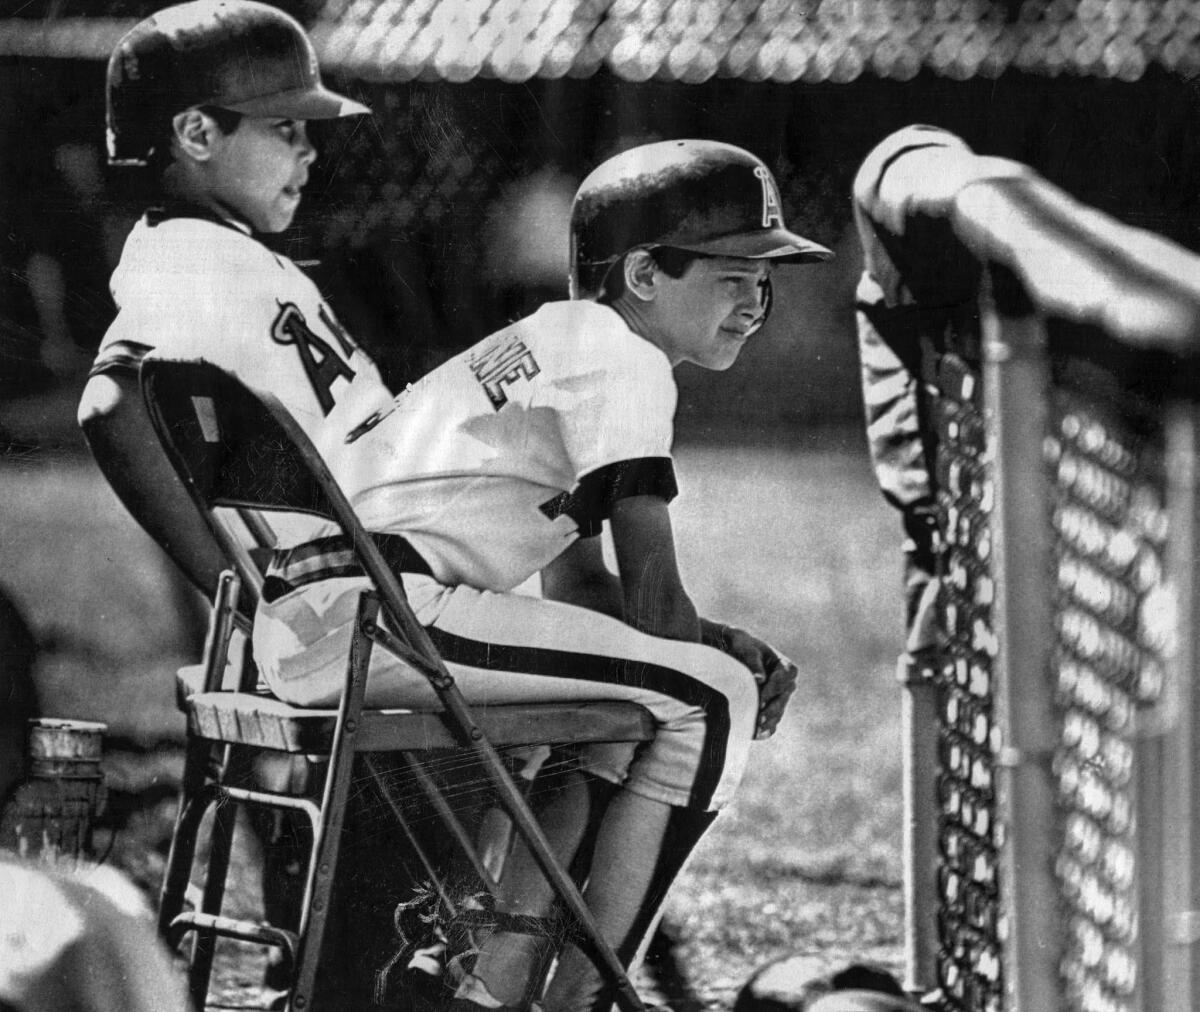 March 22, 1984: Bat boys for the Angels' game against the Oakland Athletics were Dominquez Jackson, Jr., brother of Reggie Jackson, and Aaron Boone, son of catcher Bob Boone. 